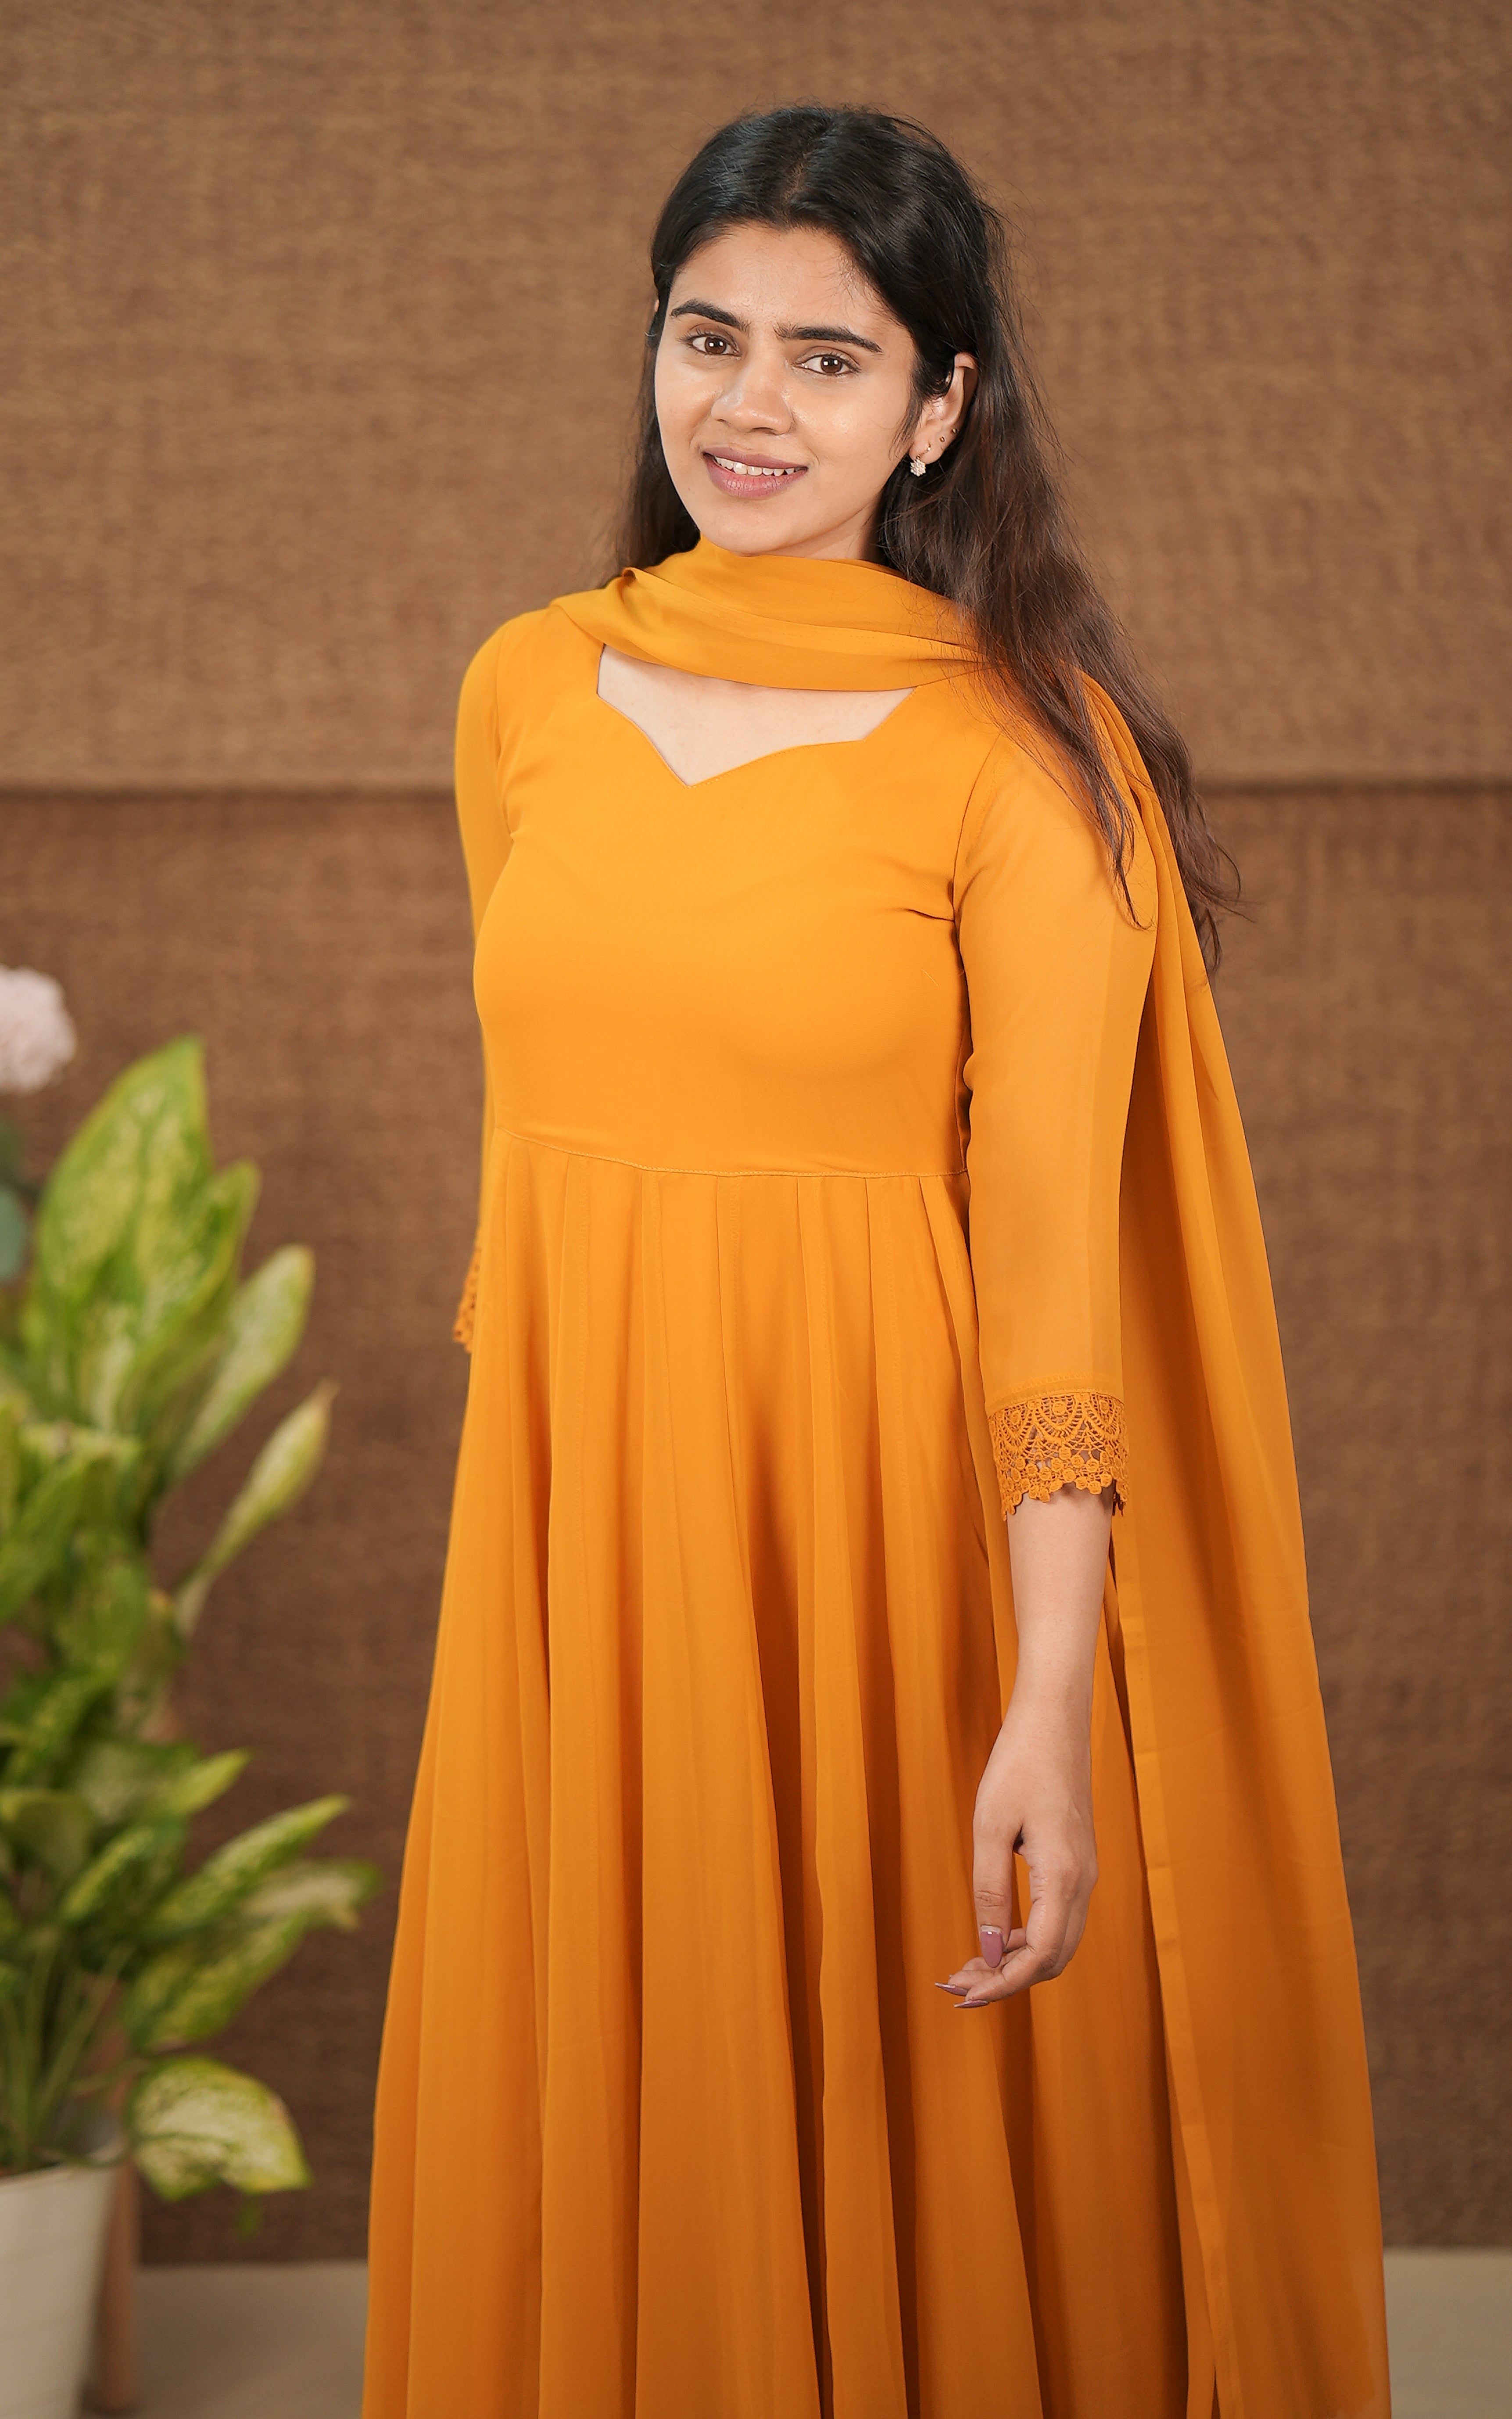 instore office wear for women georgette with butter crepe lining full flared anarkali with crochet lace border color: mustard